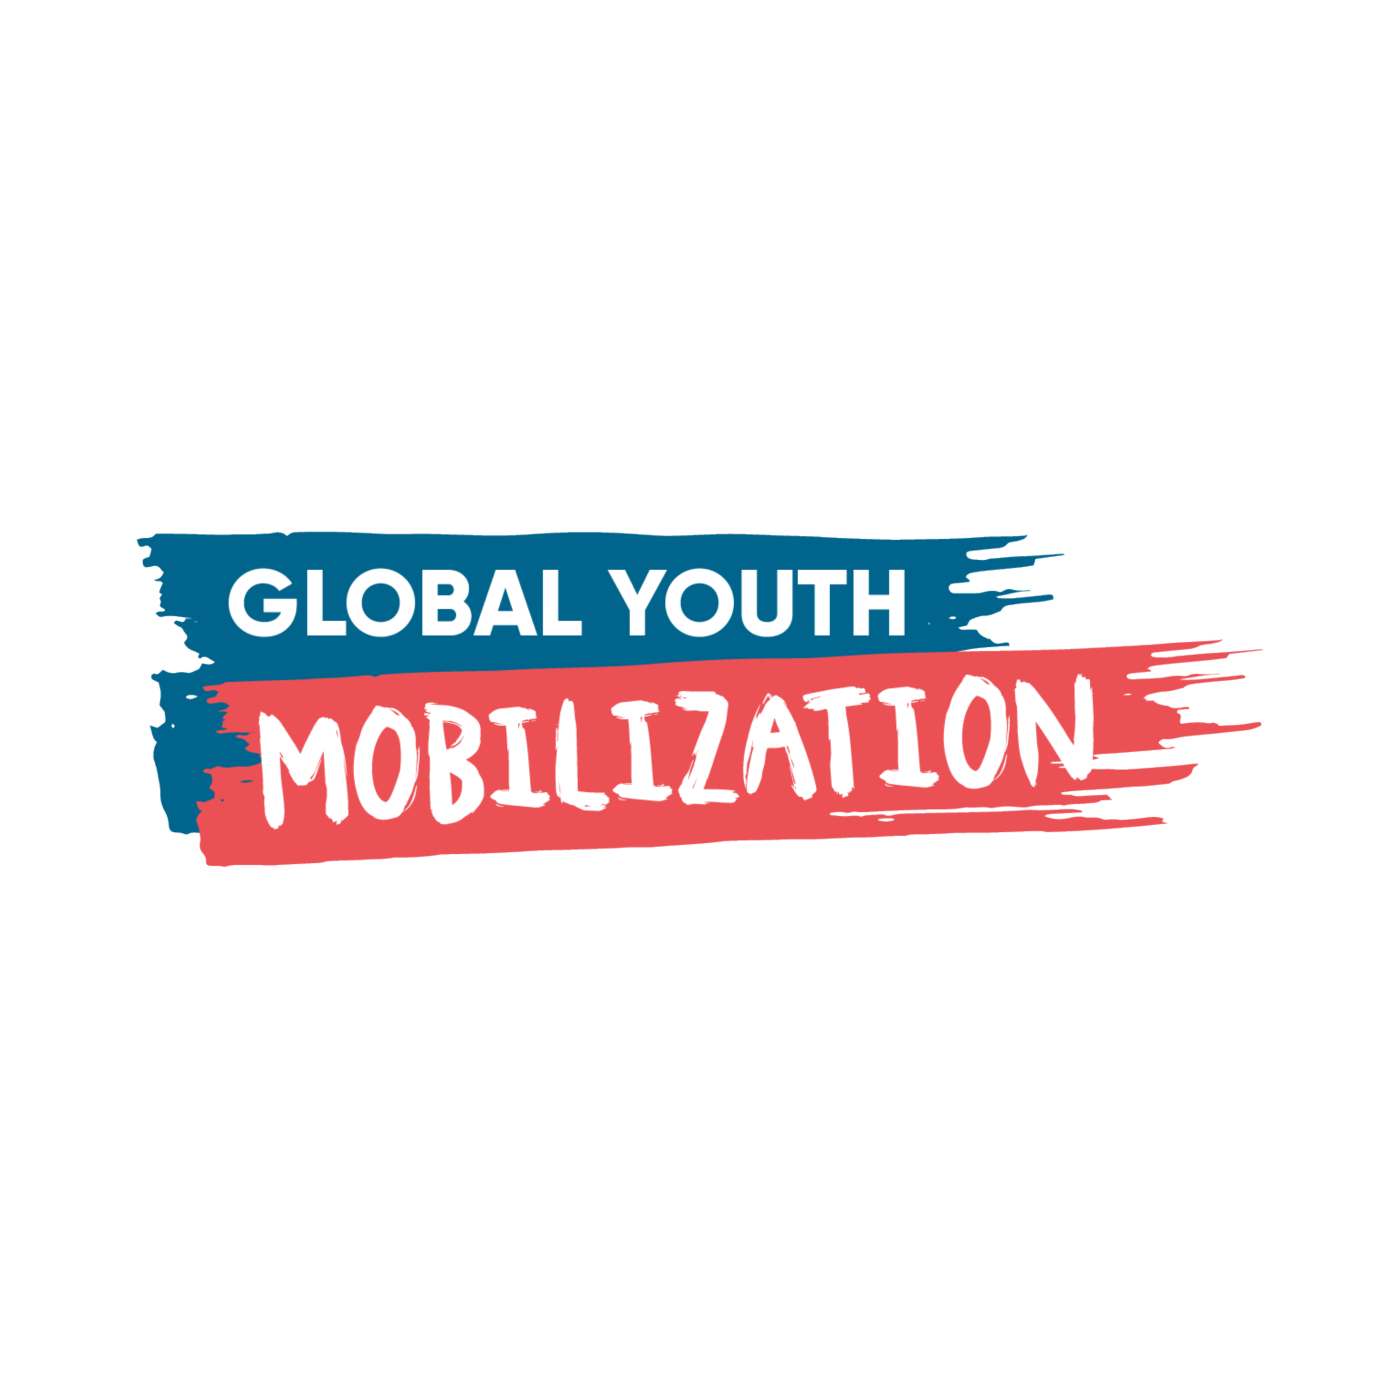 Global Youth Mobilization